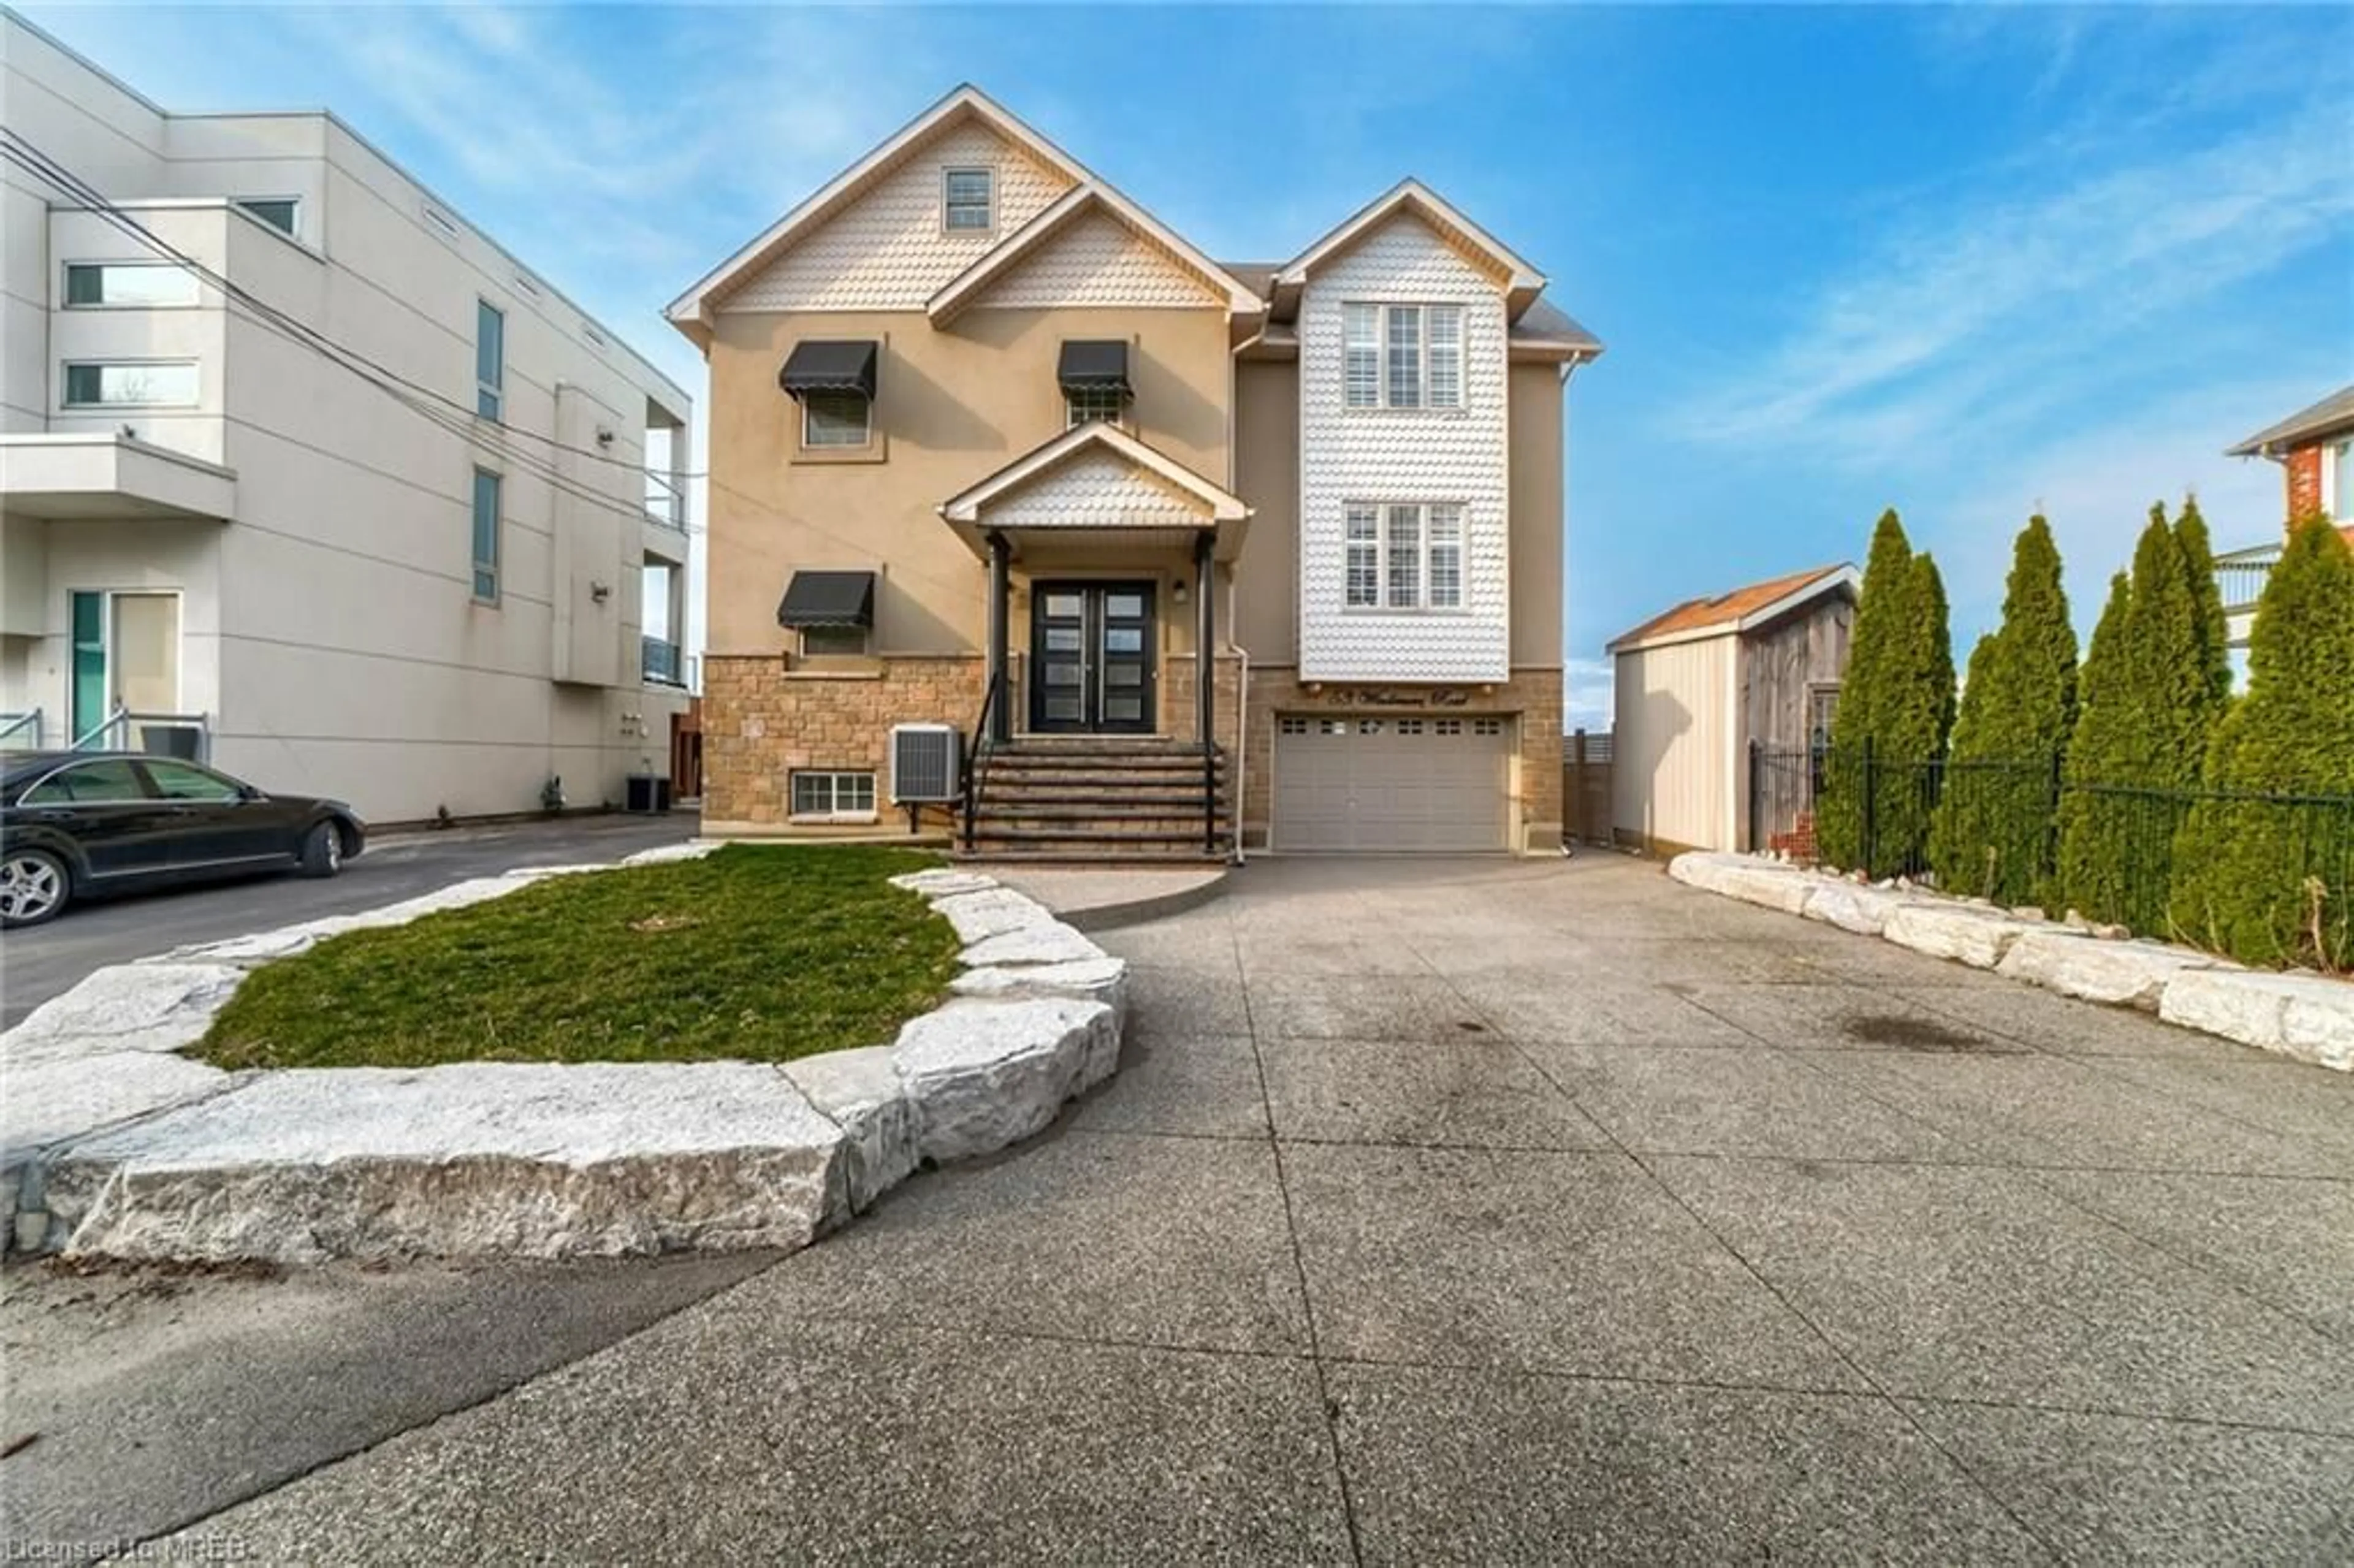 Frontside or backside of a home for 53 Windemere Rd, Stoney Creek Ontario L8E 5G5